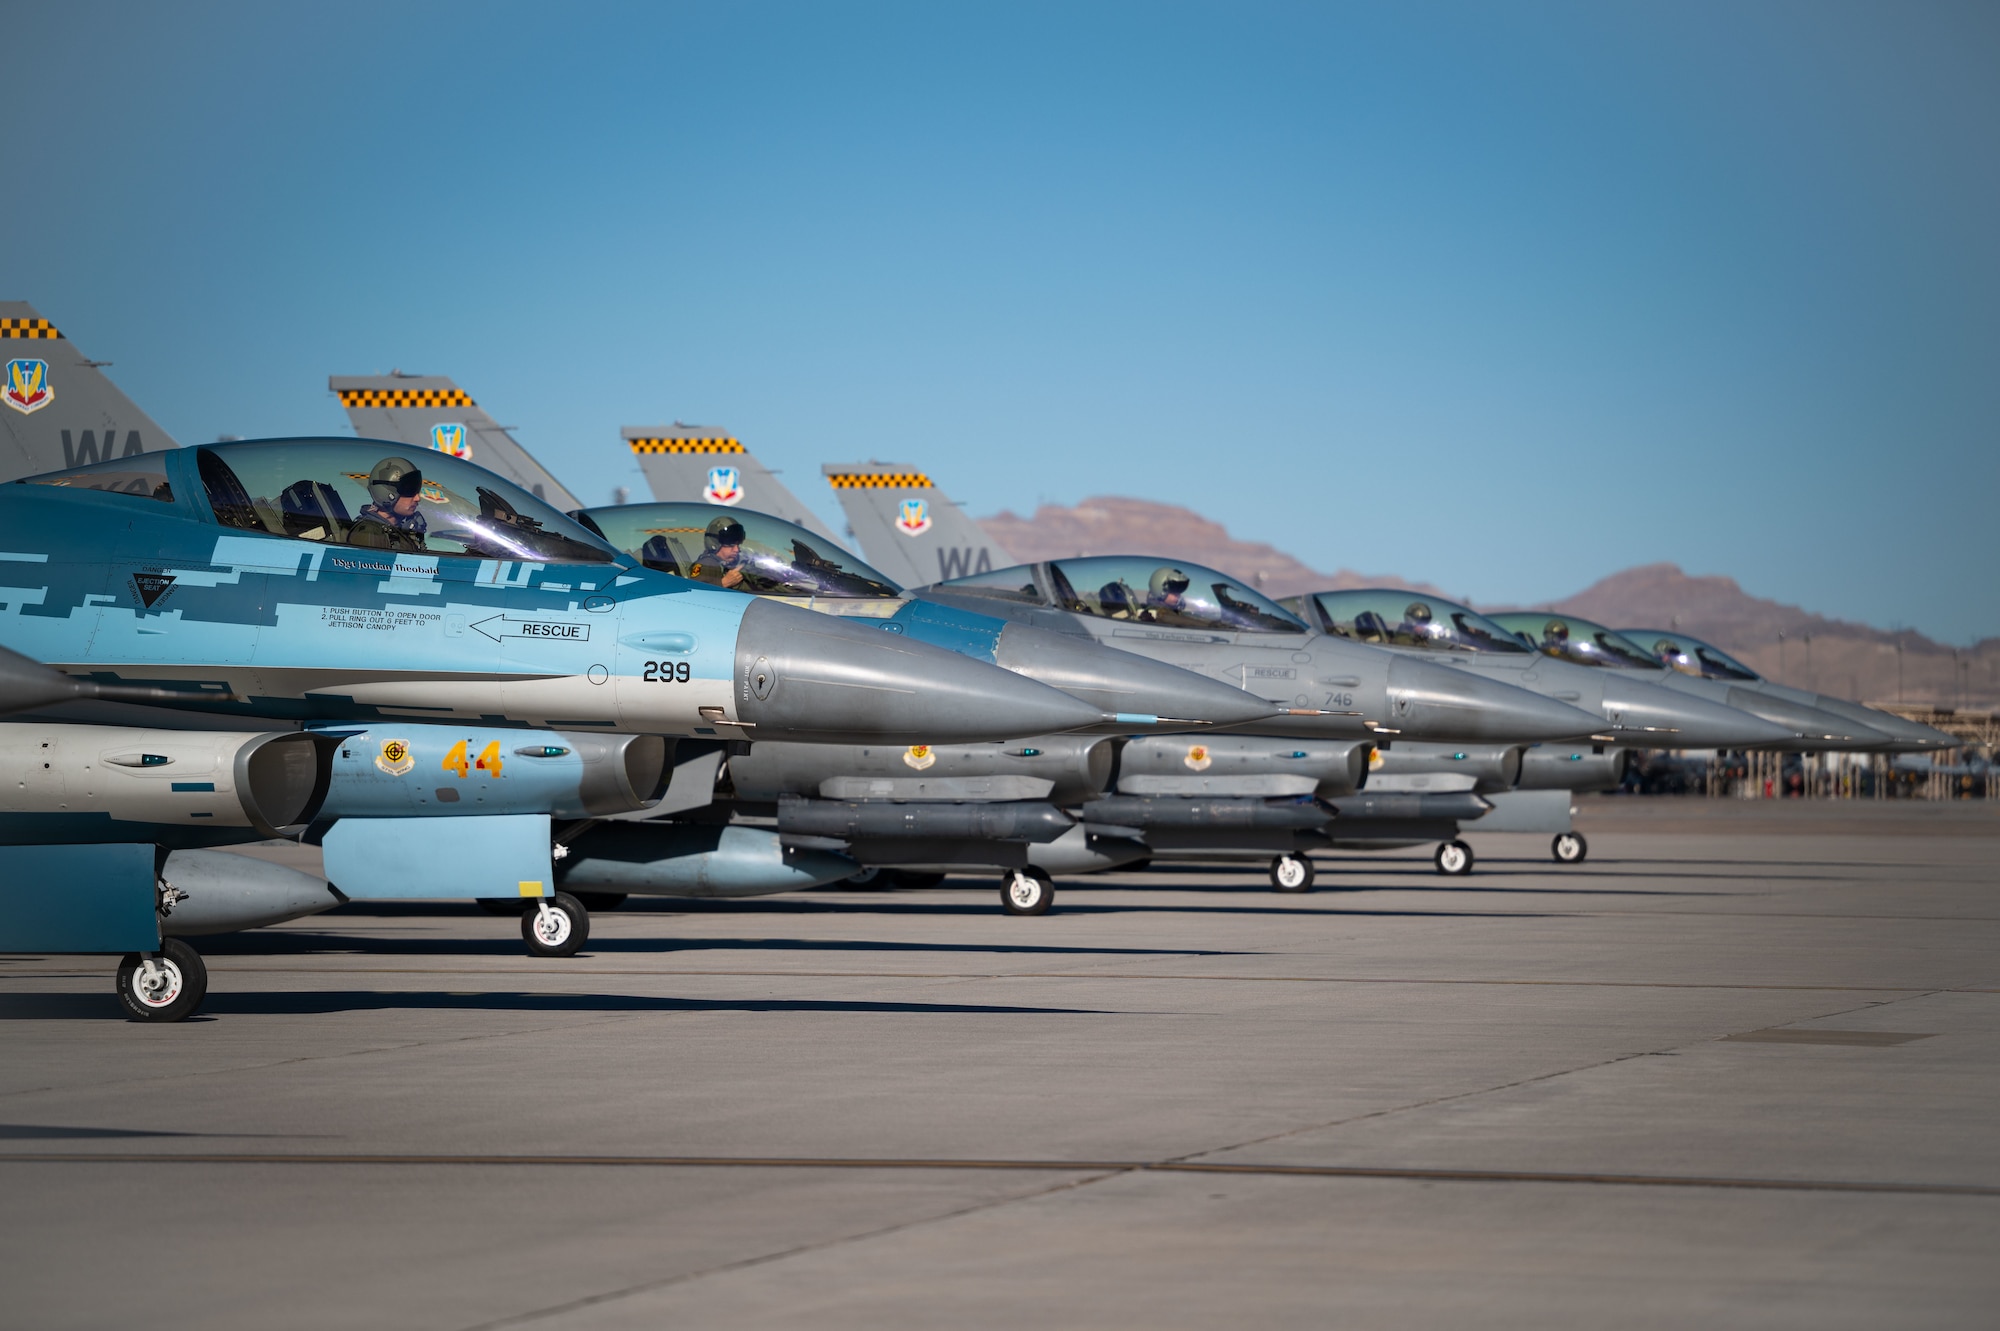 F-16C Fighting Falcons assigned to the 64th Aggressor Squadron at Nellis Air Force Base, Nevada, await take-off during Red Flag 23-1, Jan. 23, 2023. Red Flag provides participants the opportunity to plan and employ together in a contested, degraded and operationally limited environment. (U.S. Air Force photo by Senior Airman Megan Estrada)